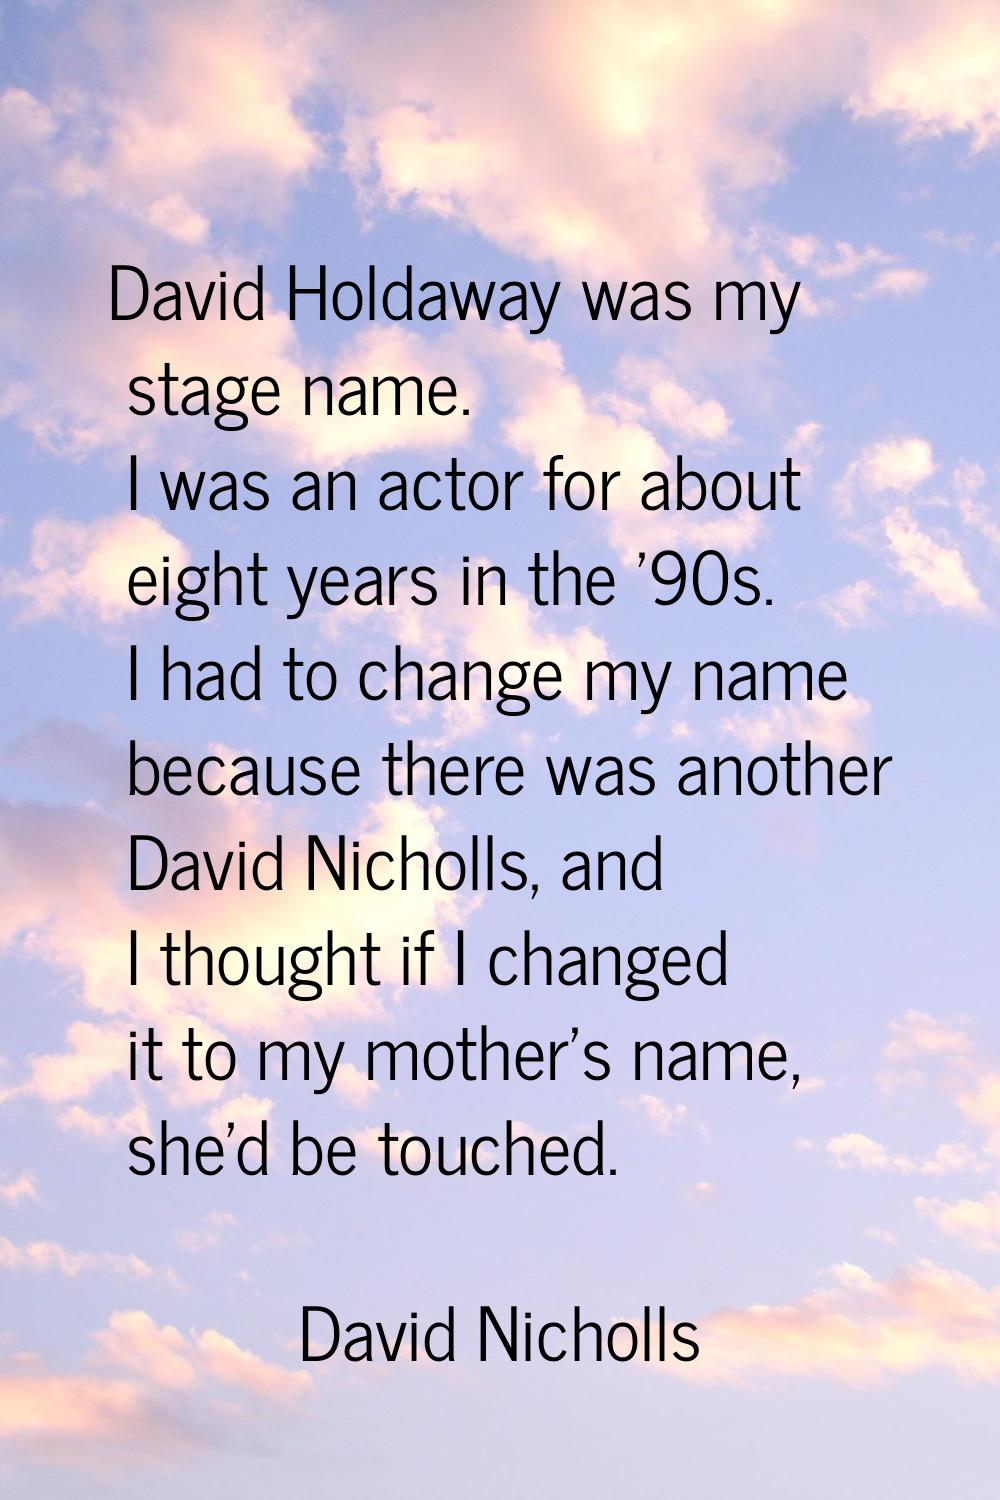 David Holdaway was my stage name. I was an actor for about eight years in the '90s. I had to change